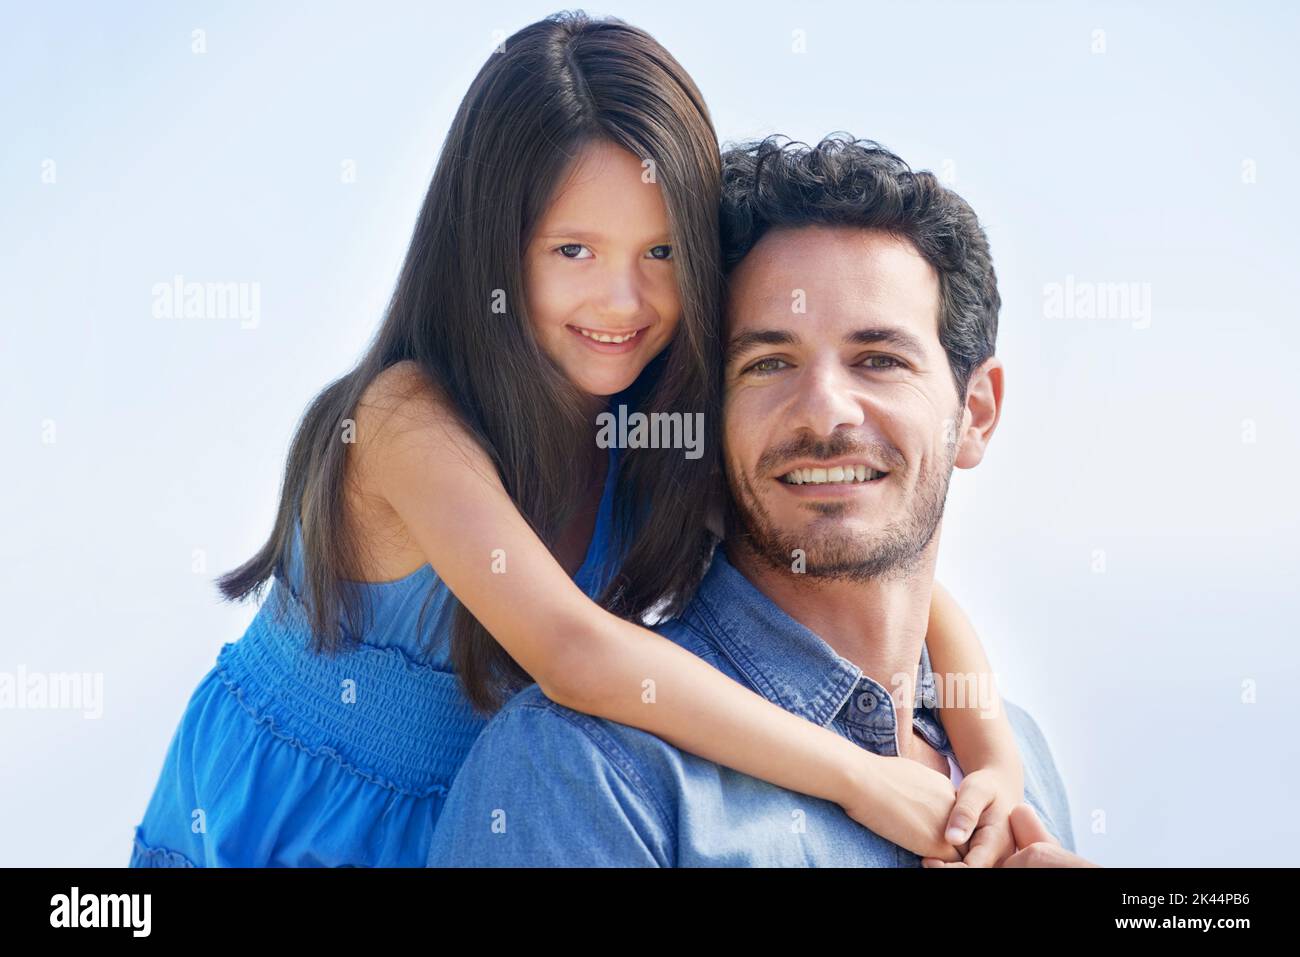 Portrait of father and daughter bond. Outdoor portrait of a smiling father and daughter. Stock Photo